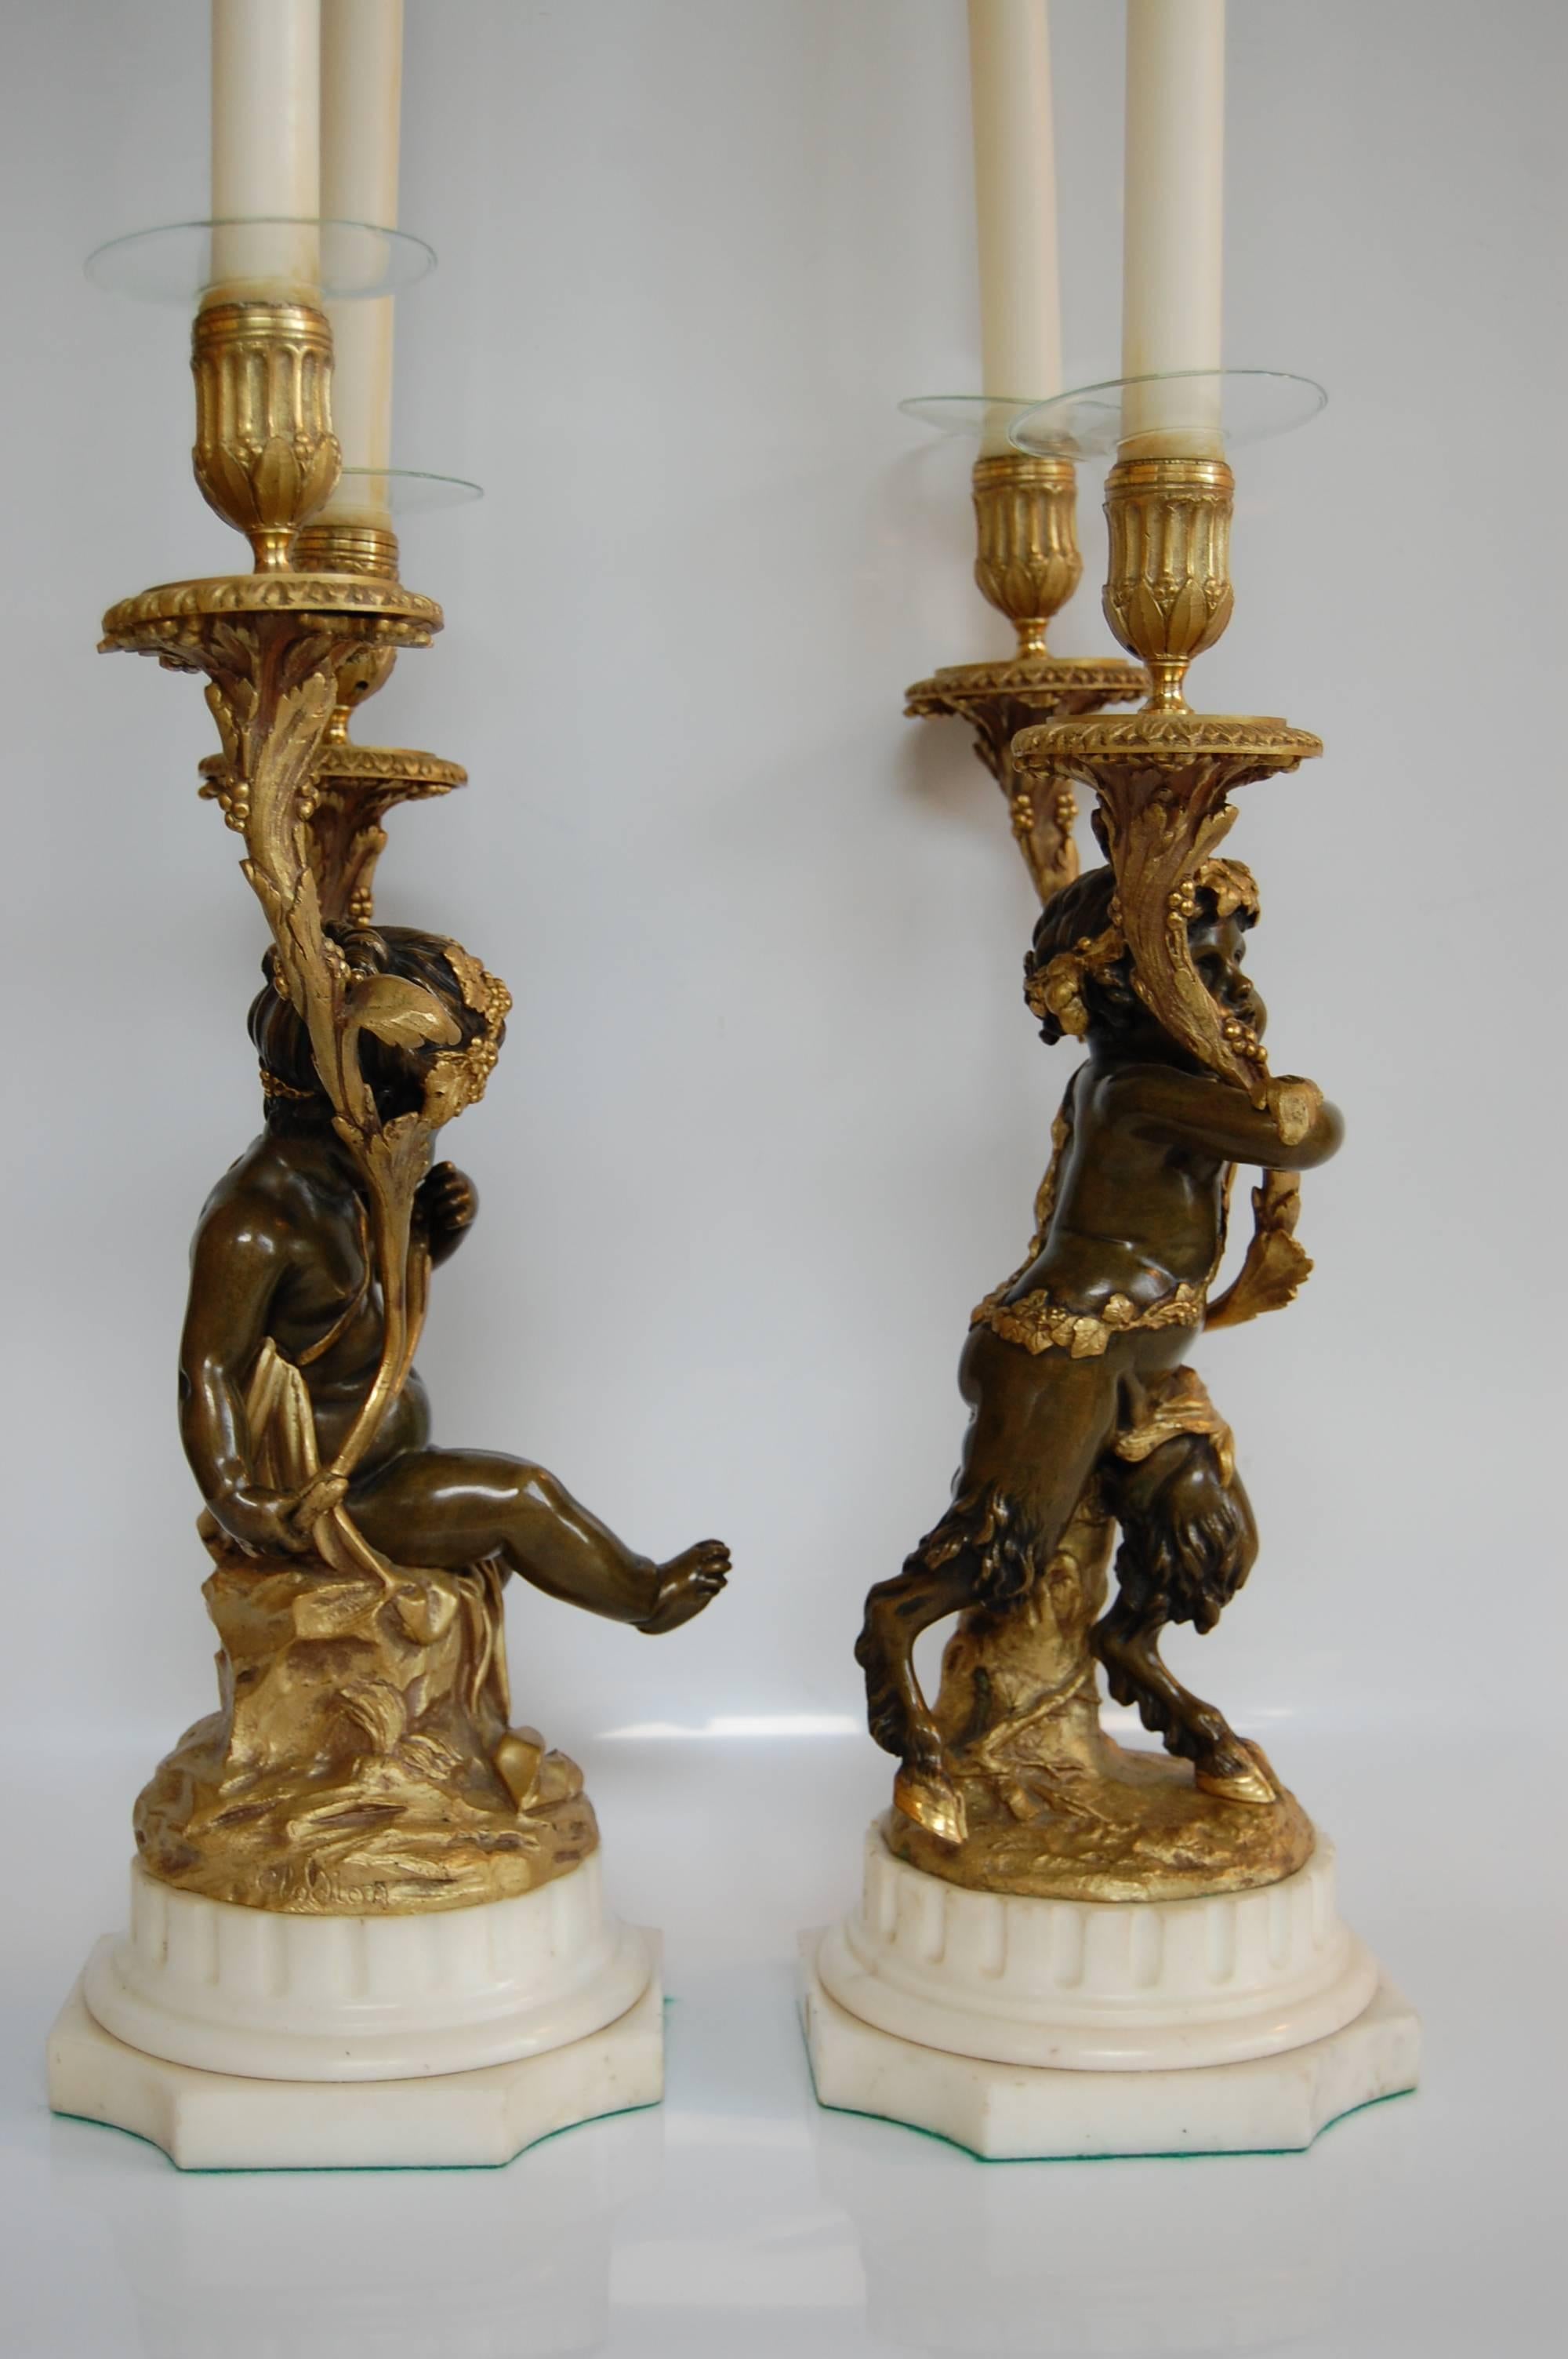 This pair of gilt and patinated candelabra are in excellent condition and make quite a statement. The finish on both the metal and marble are in excellent condition. Originally wired, it has since been removed for candle burning, but can be